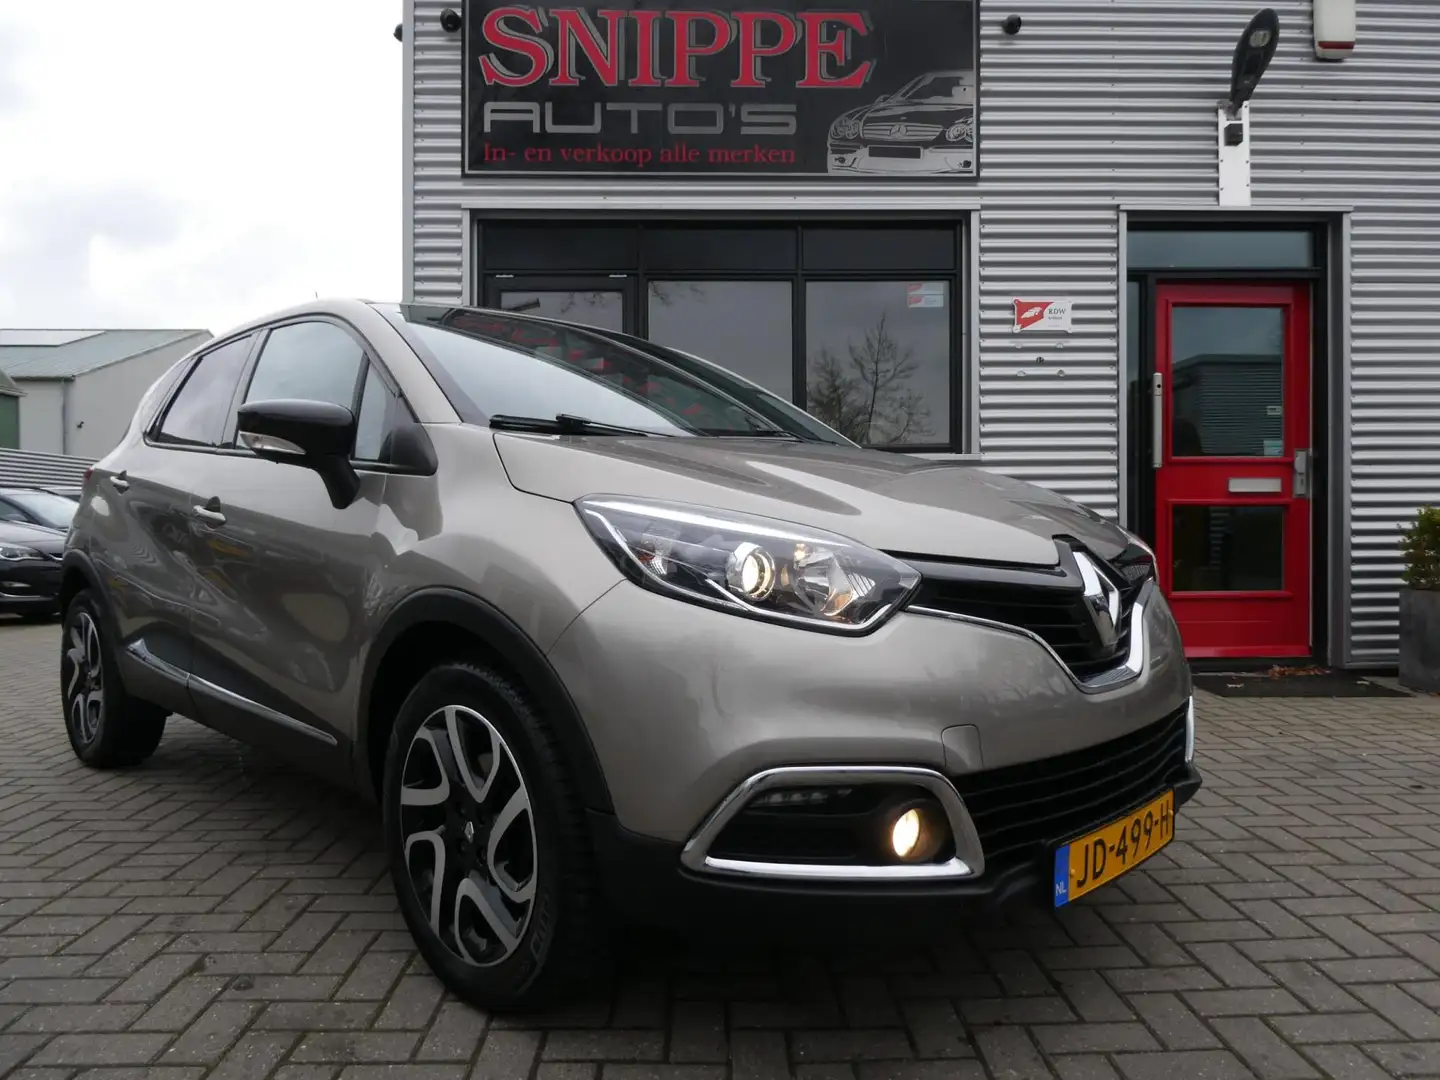 Renault Captur 1.5 dCi Dynamique -CLIMA-CRUISE-KEYLESS-CAMERA-DAB Brown - 2